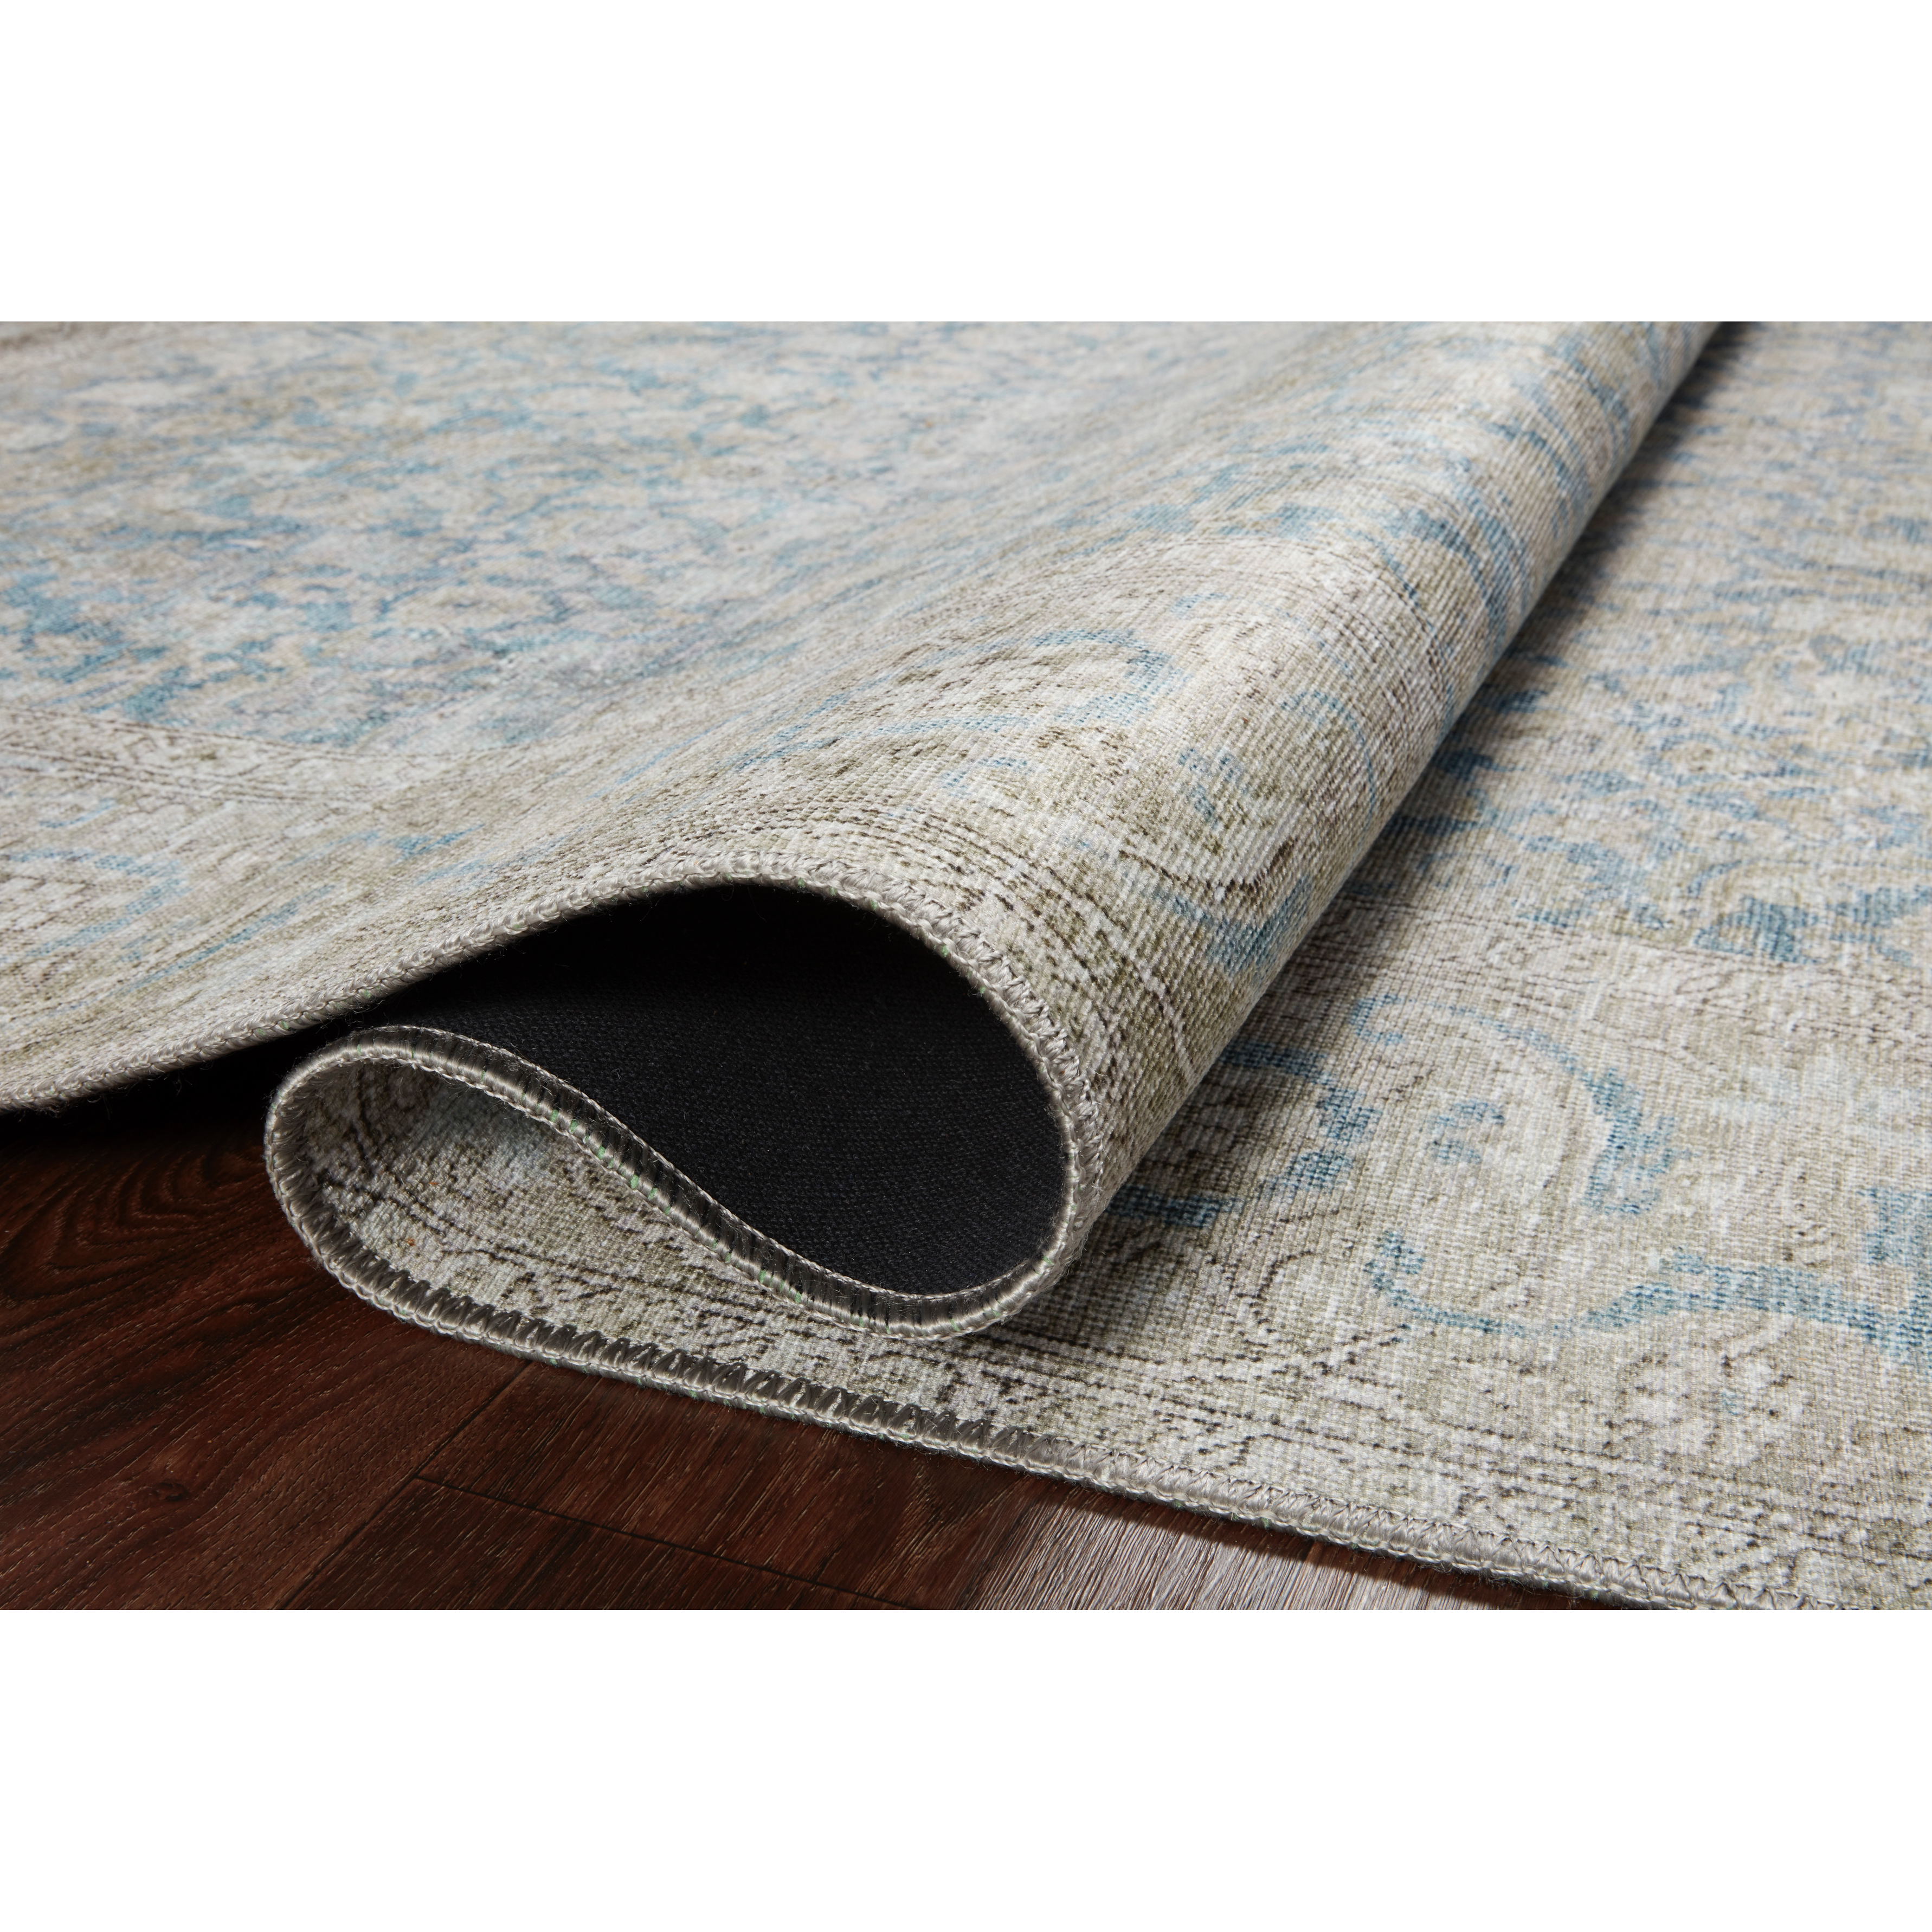 Power-loomed of 100% polyester, the Wynter Ocean / Silver WYN-10 area rug from Loloi showcases a one-of-a-kind vintage or antique area rug look at an affordable price. The rug is ideal for high traffic areas due to the rug's durability making it perfect for living rooms, dining rooms, kitchens, hallways, entryways. Amethyst Home provides interior design, new construction, custom furniture, and rugs for the Winter Park, Winter Garden, Orlando, and Tampa Florida metro area.